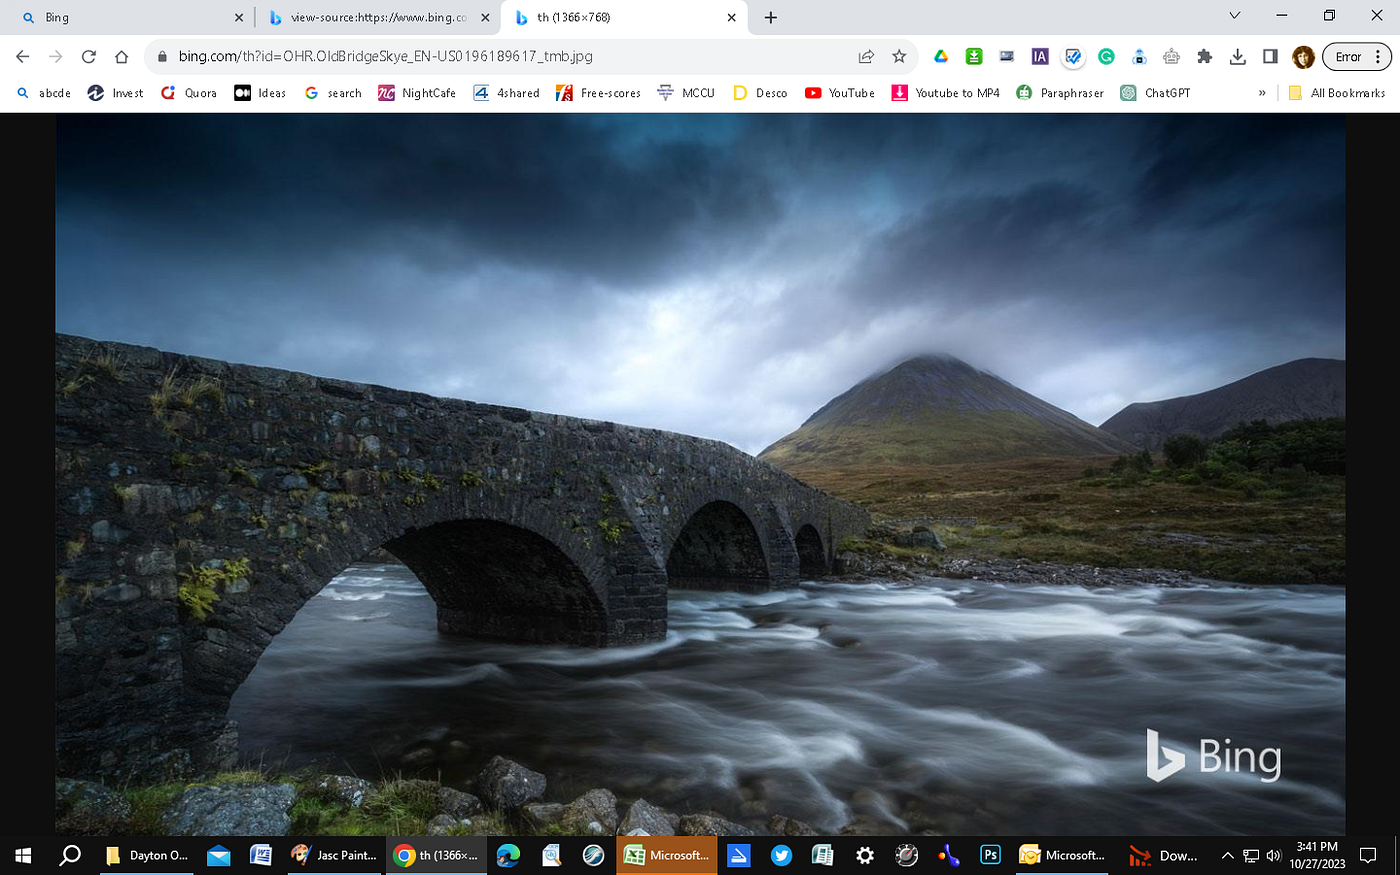 Make the Bing Homepage Image Your Logon Screen Background in Windows 7